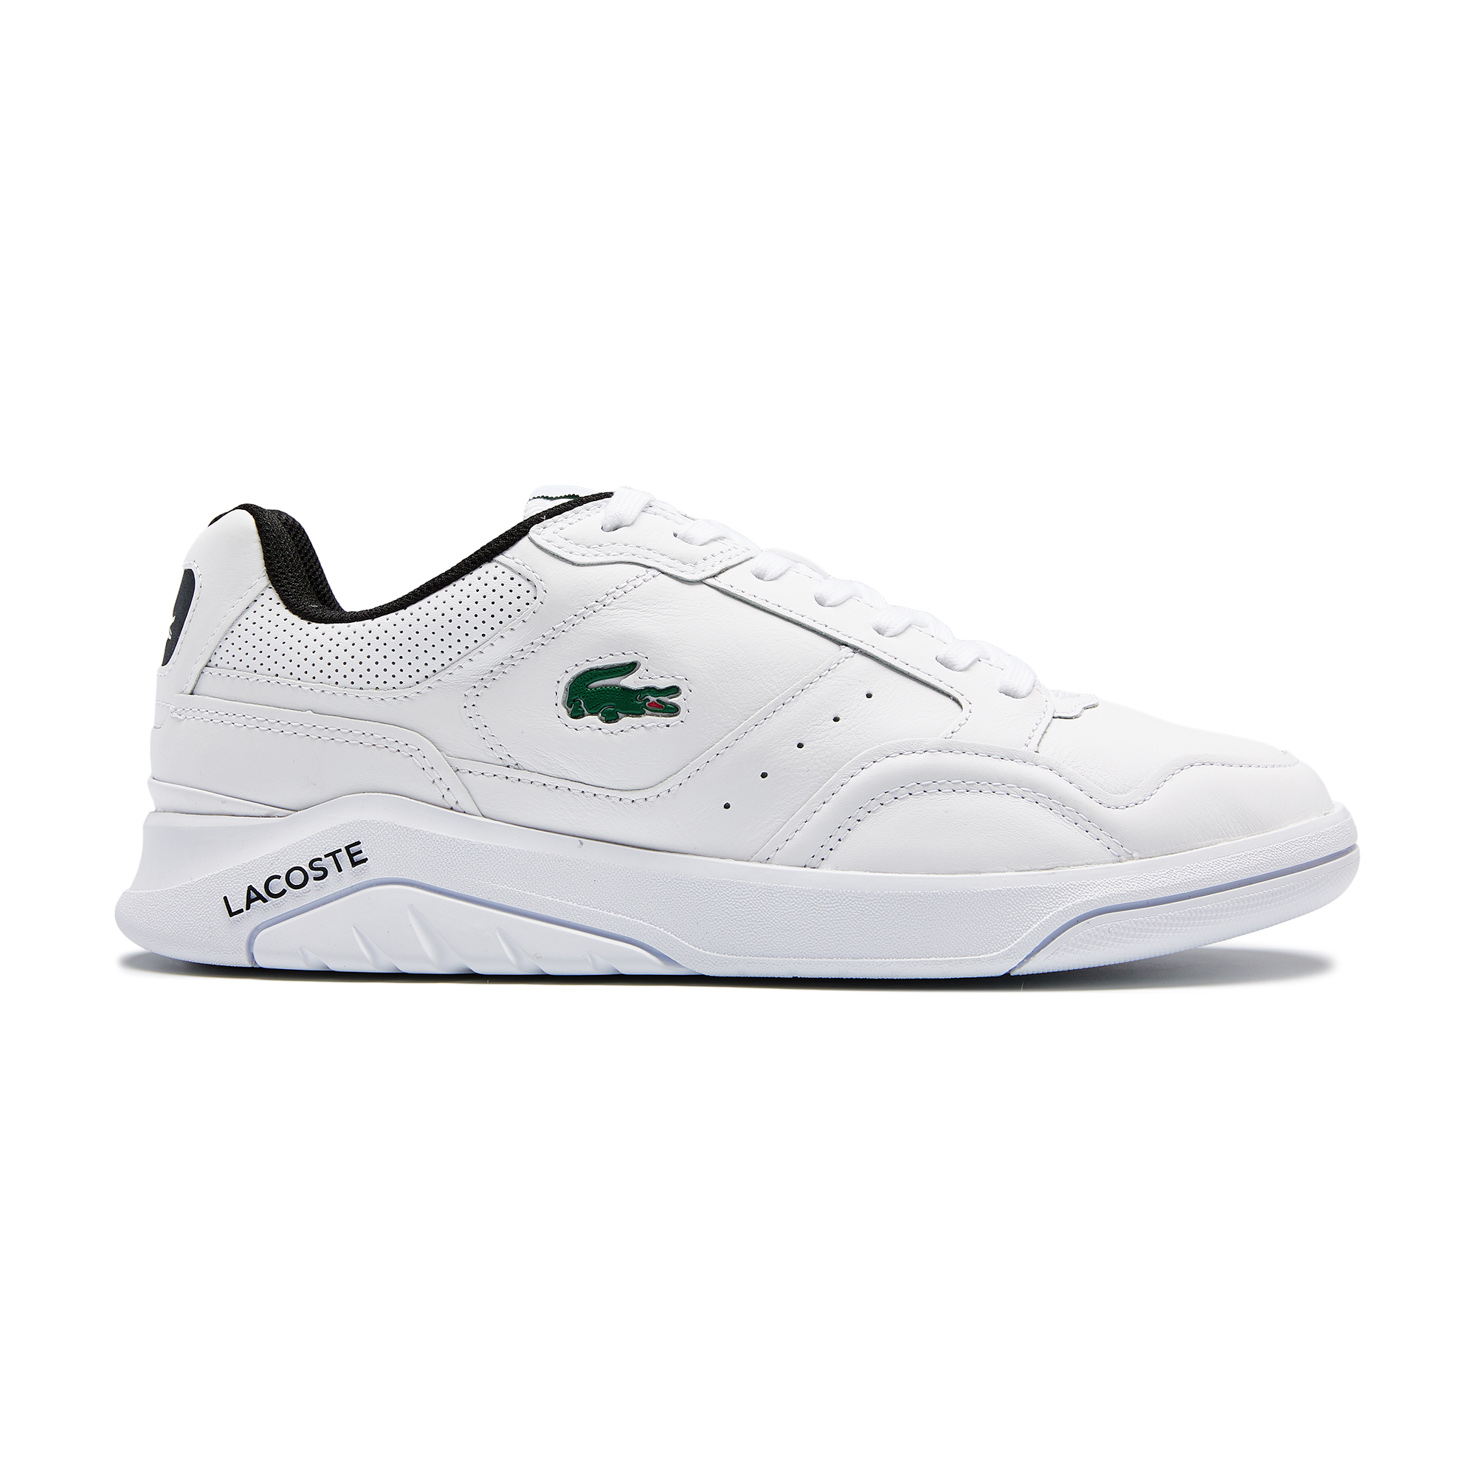 GAME ADVANCE LUXE LACOSTE, размер 40, цвет белый 742SMA0013 - фото 1